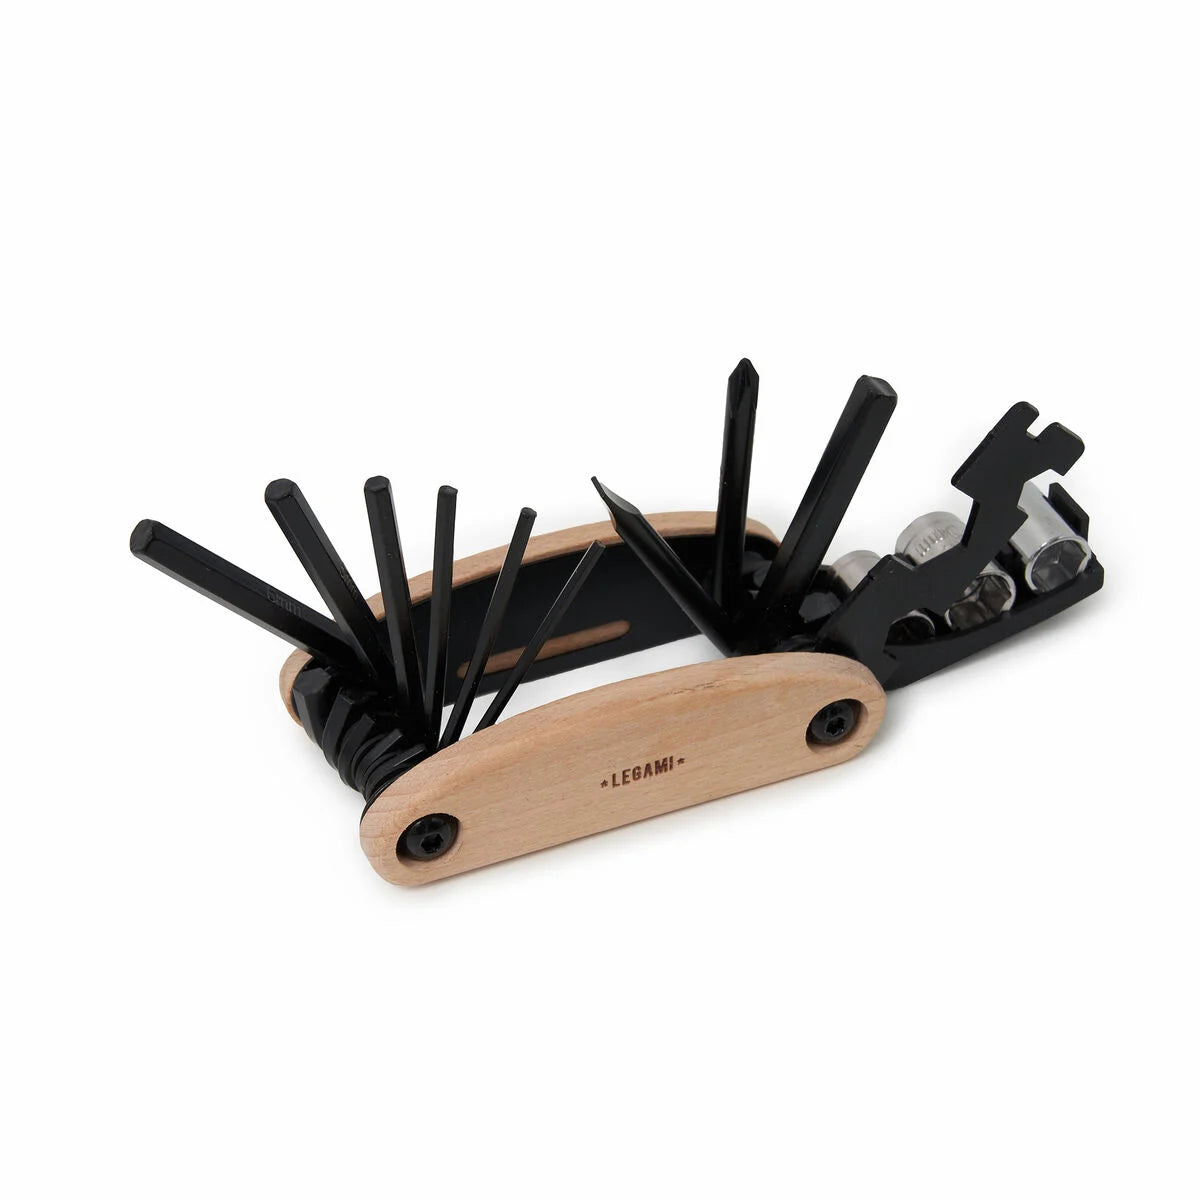 Fab Gifts | Legami 13-in-1 - Bike Multi Tool by Weirs of Baggot Street